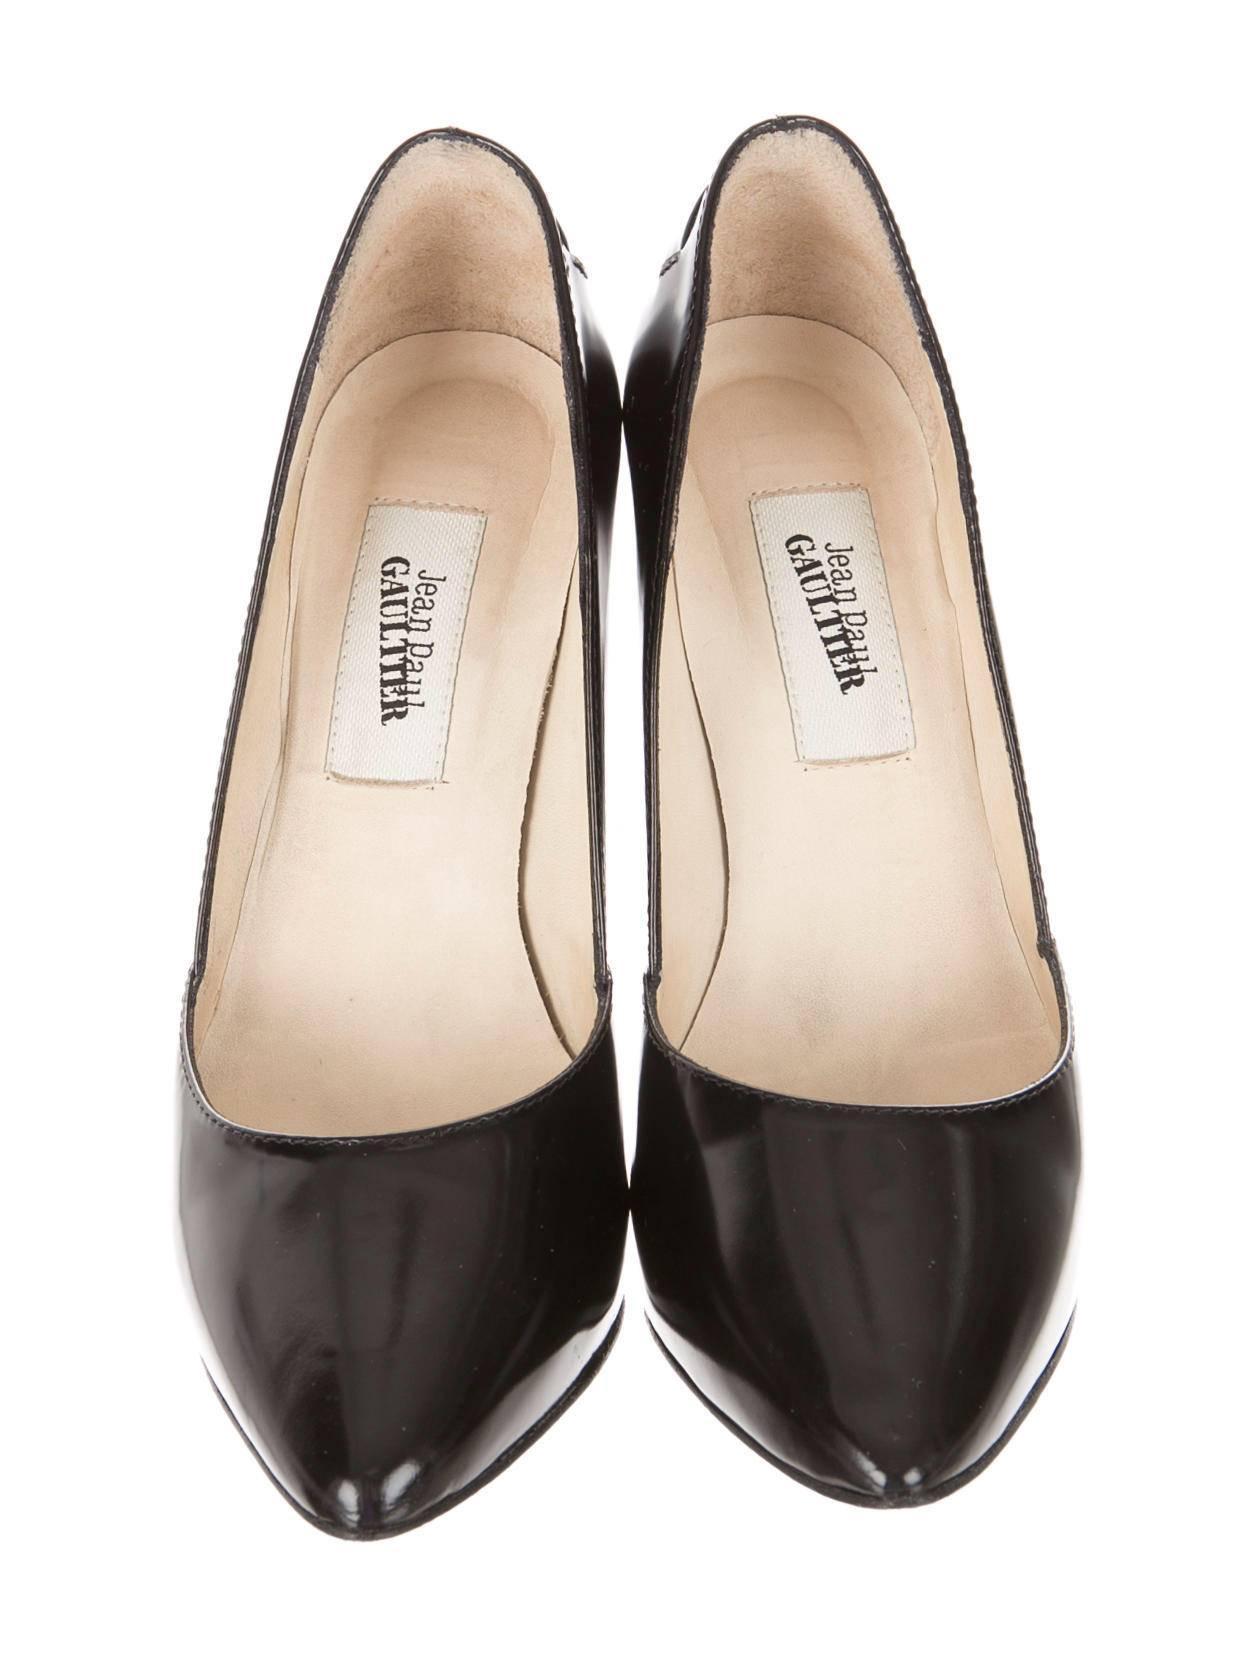 Jean Paul Gaultier Platform Pumps, IT 37 In Excellent Condition For Sale In Bethesda, MD